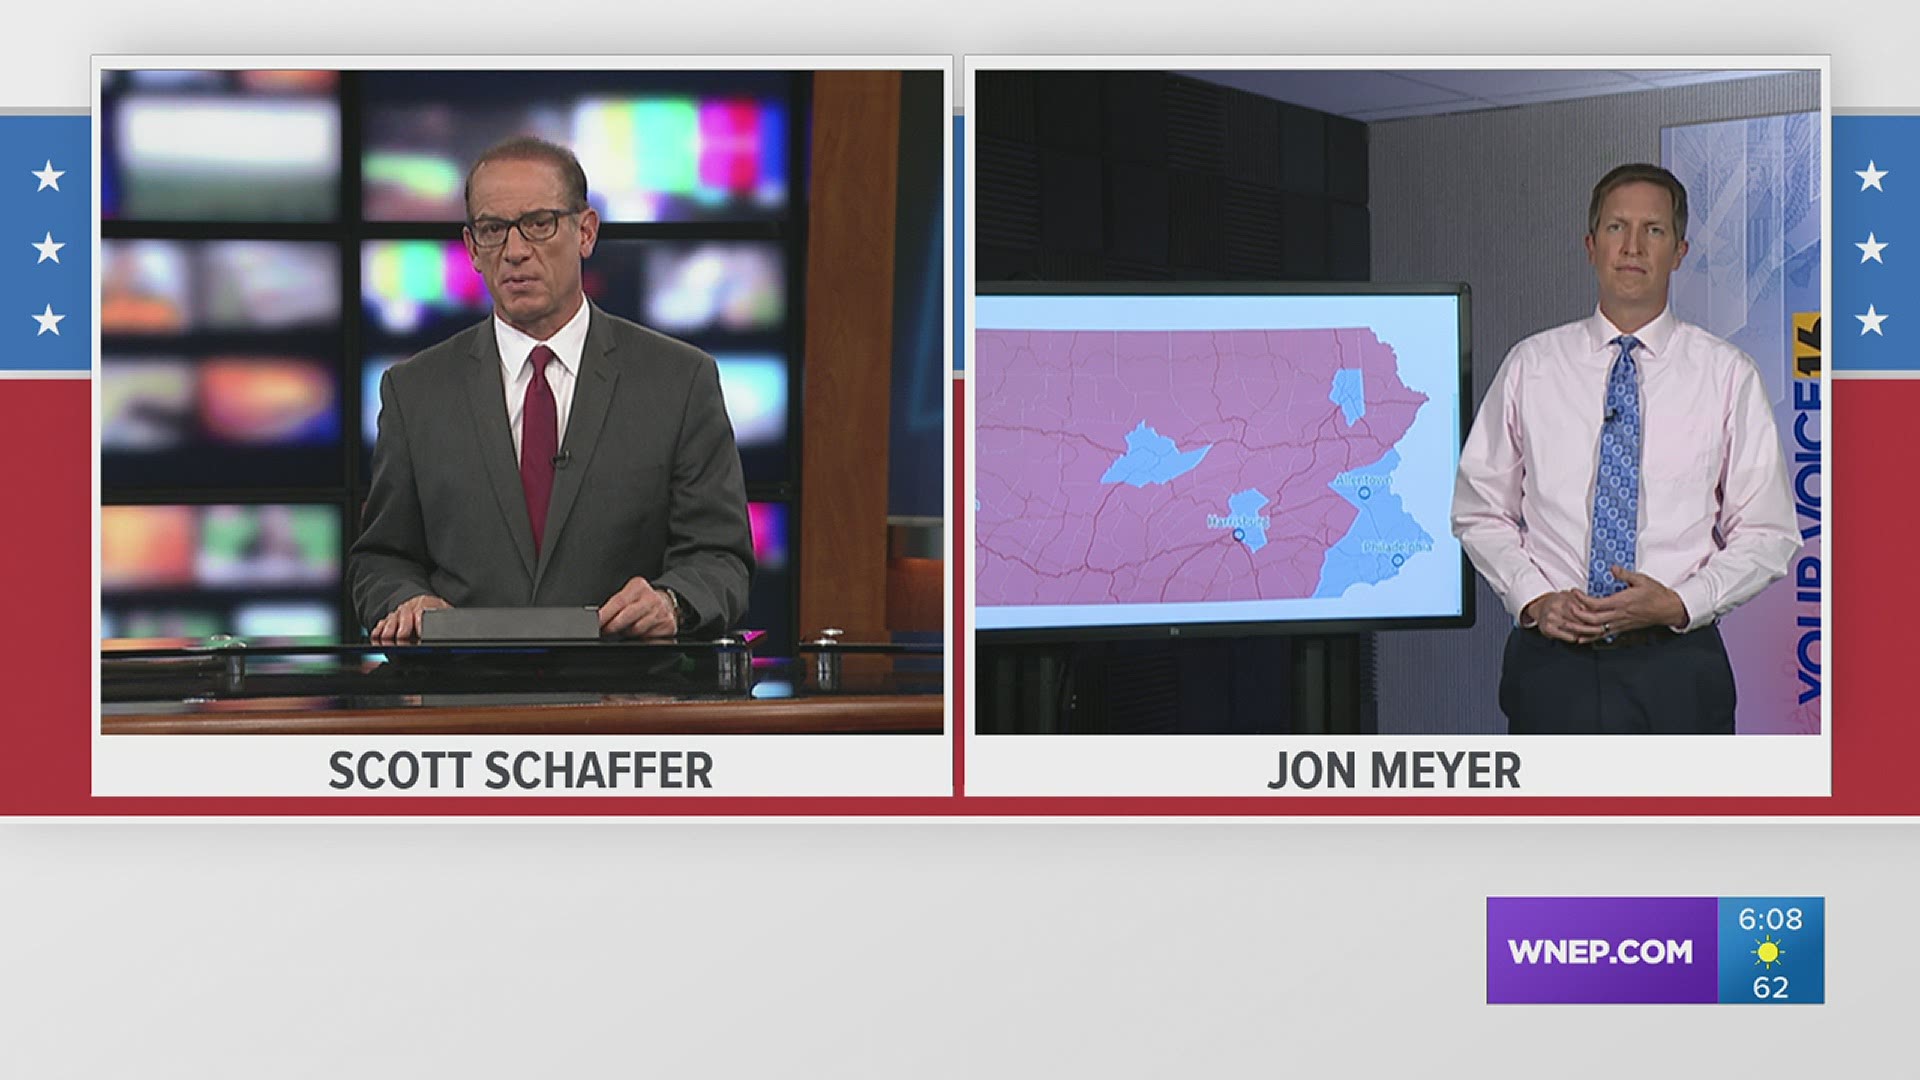 Our Jon Meyer breaks down which counties have ballots left to count and how many